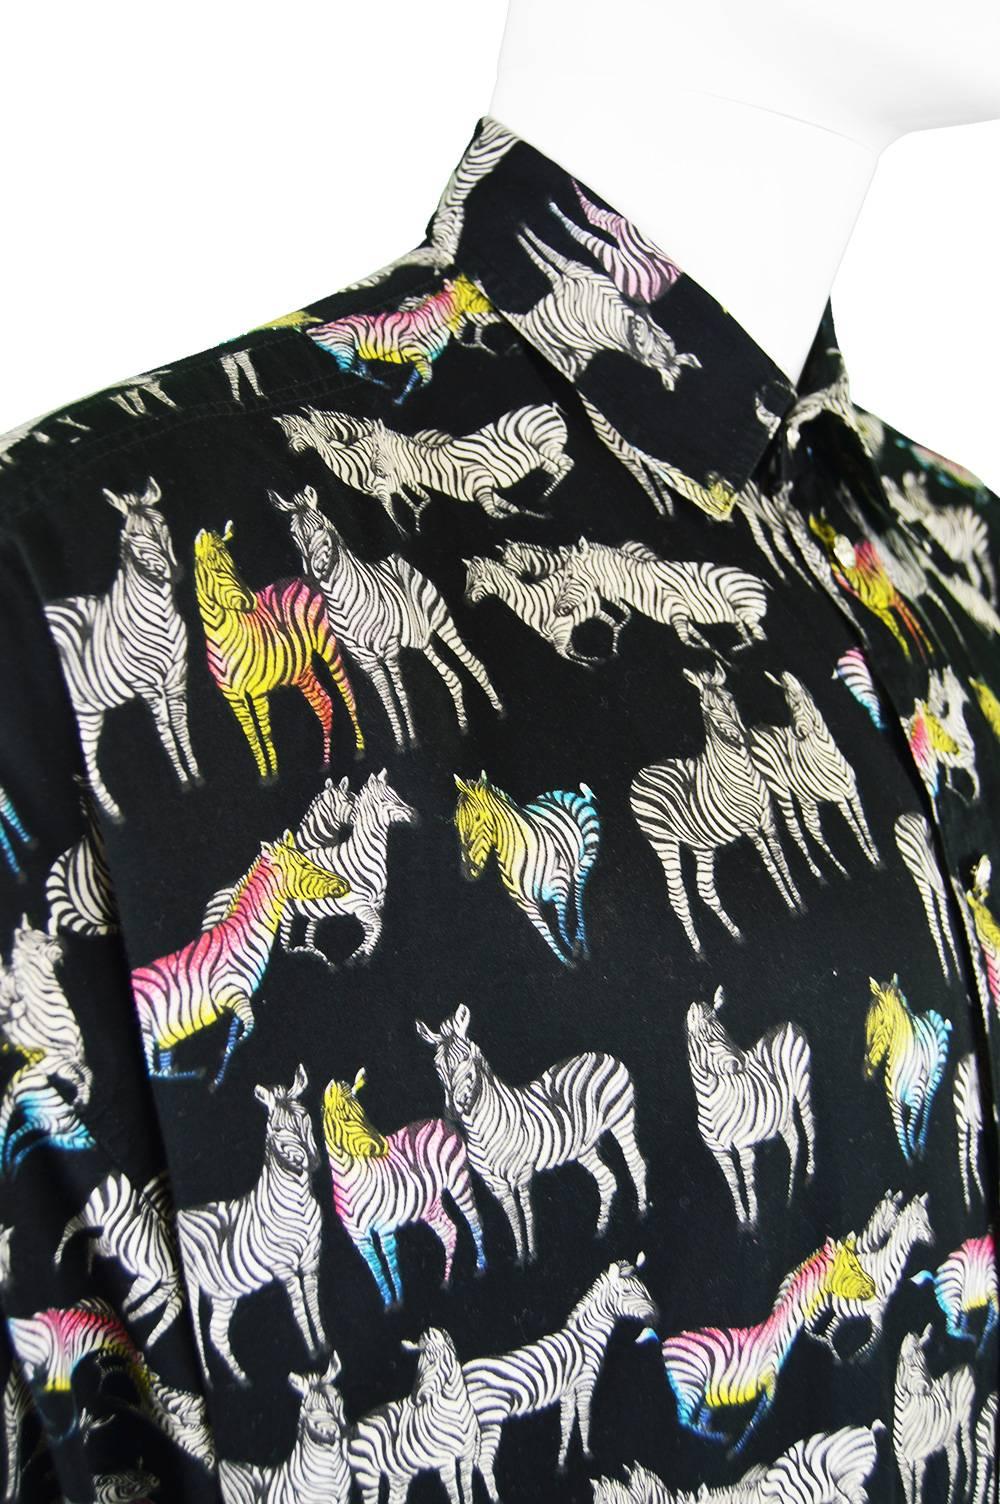 Women's or Men's Versace Jeans Couture Rainbow Zebra Men's Cotton Shirt. Made in Italy, 1990s